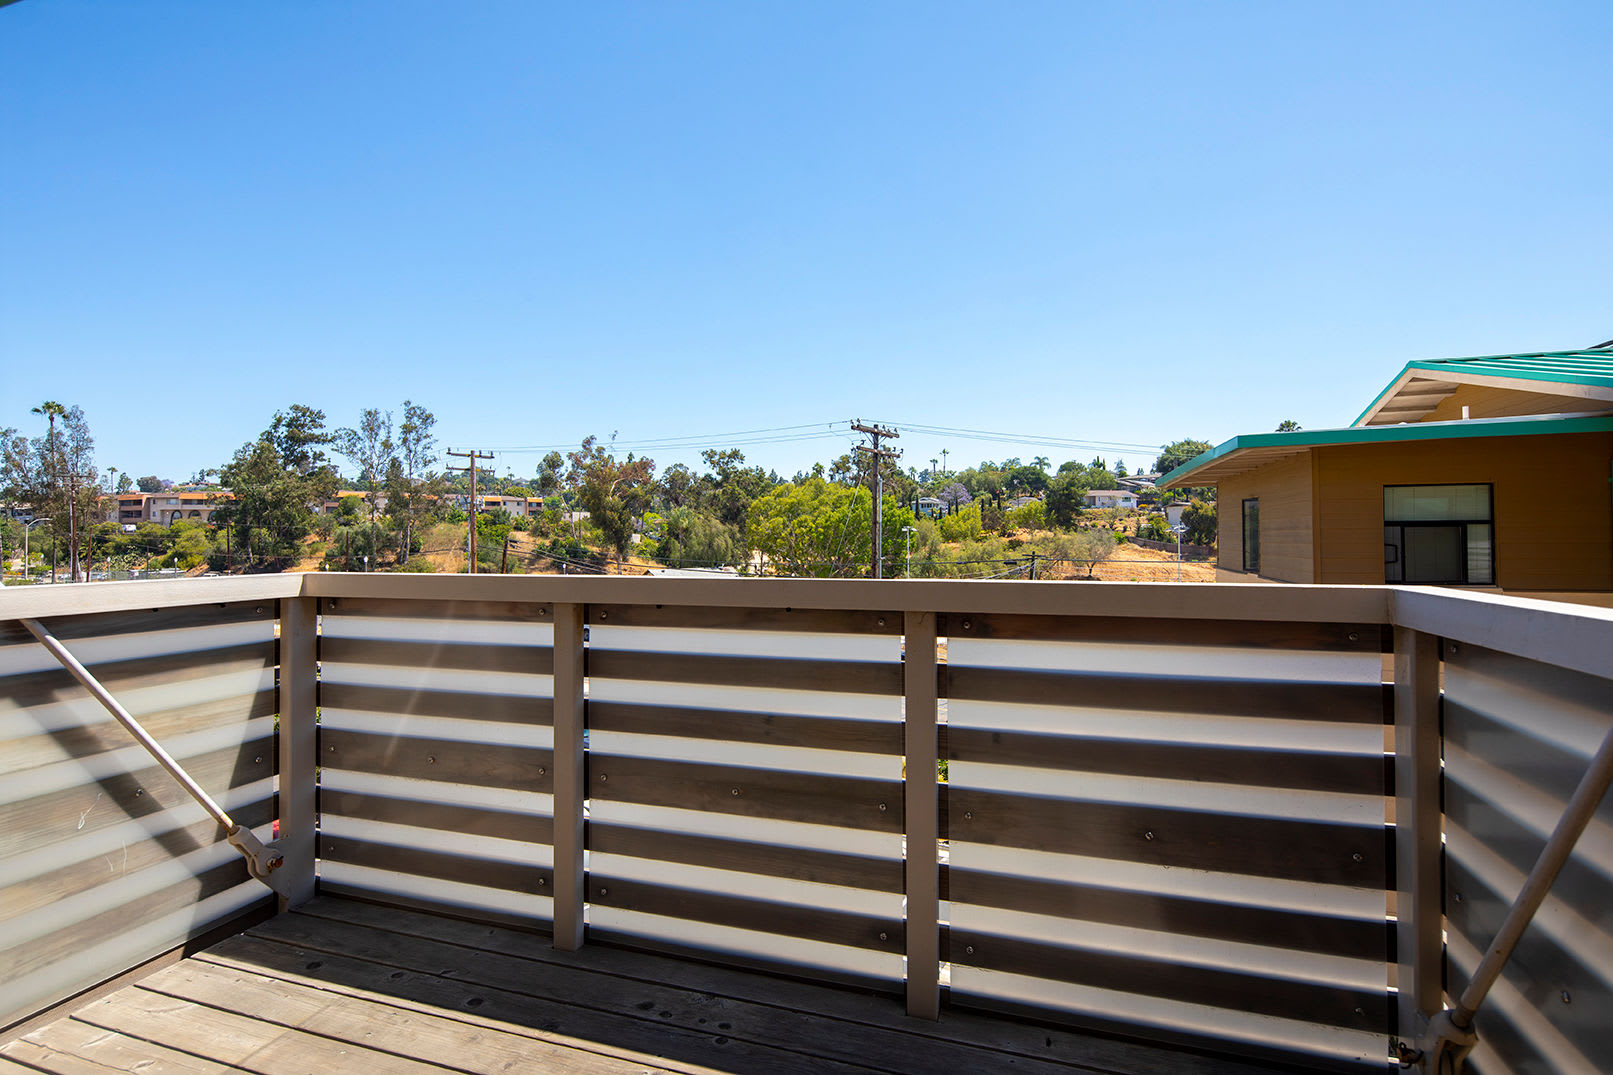 Balcony overlooking the city at The Quarry Apartments in La Mesa, California